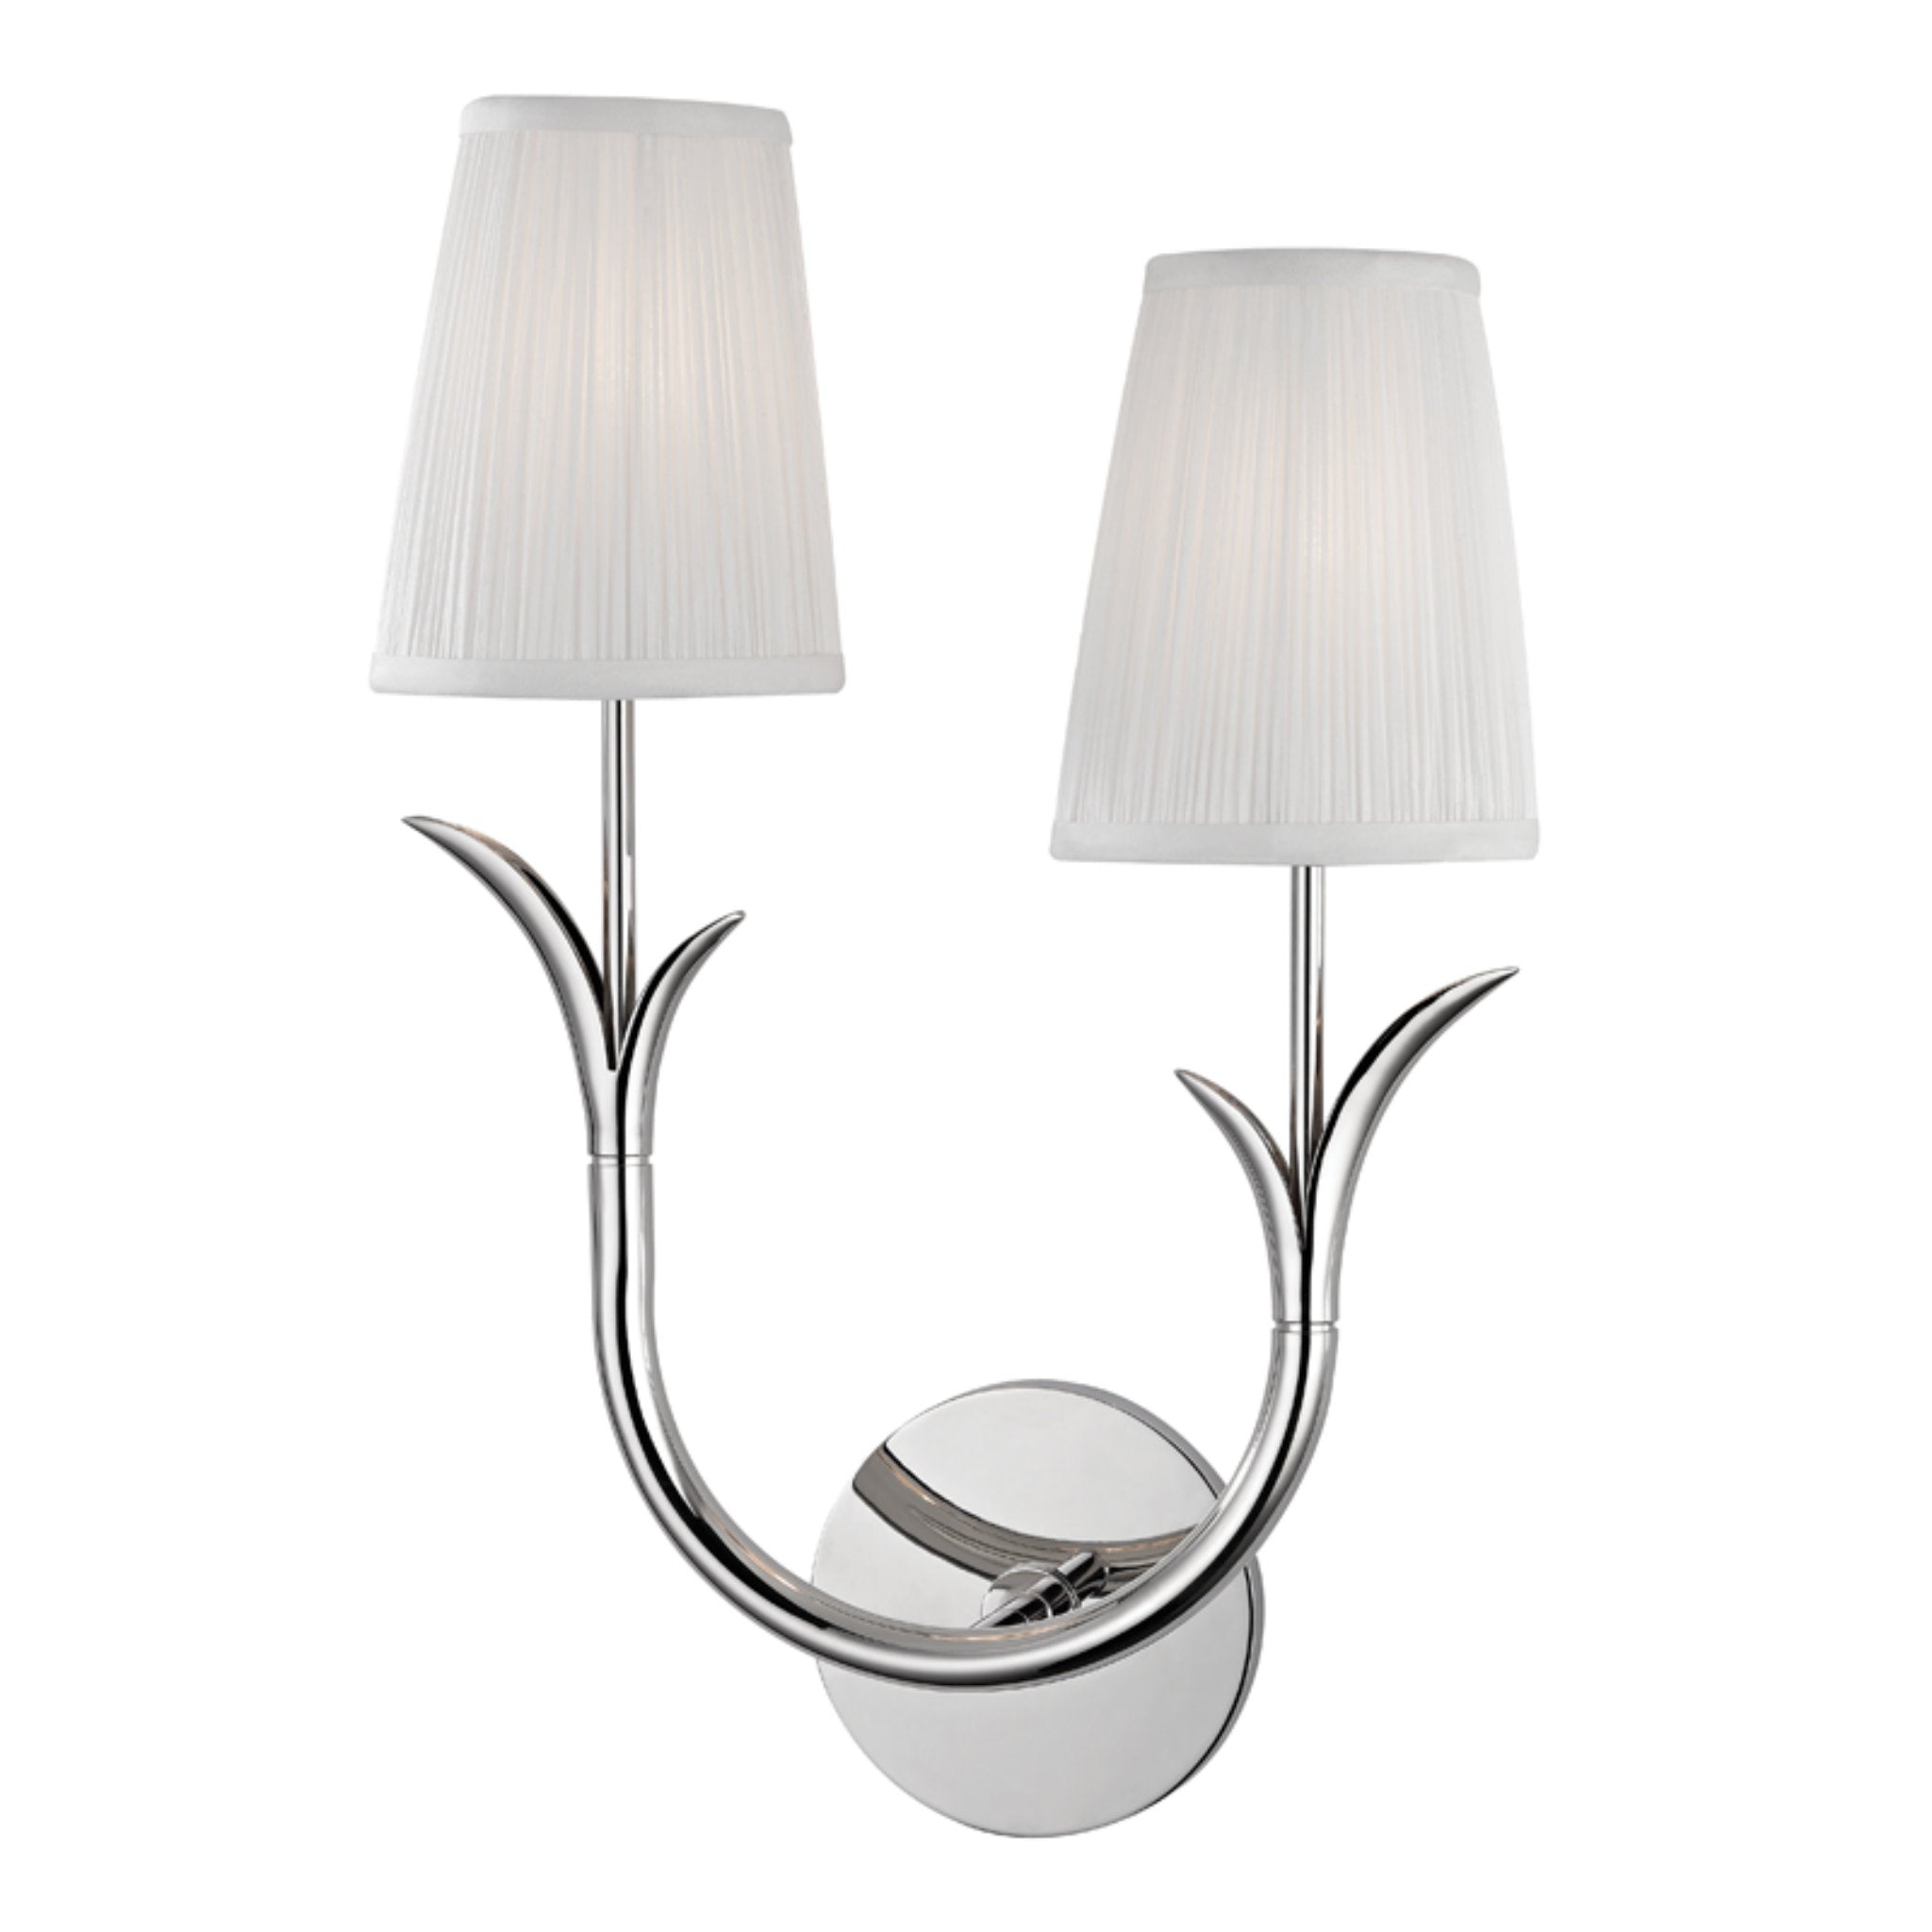 Deering 2 Light Wall Sconce in Polished Nickel